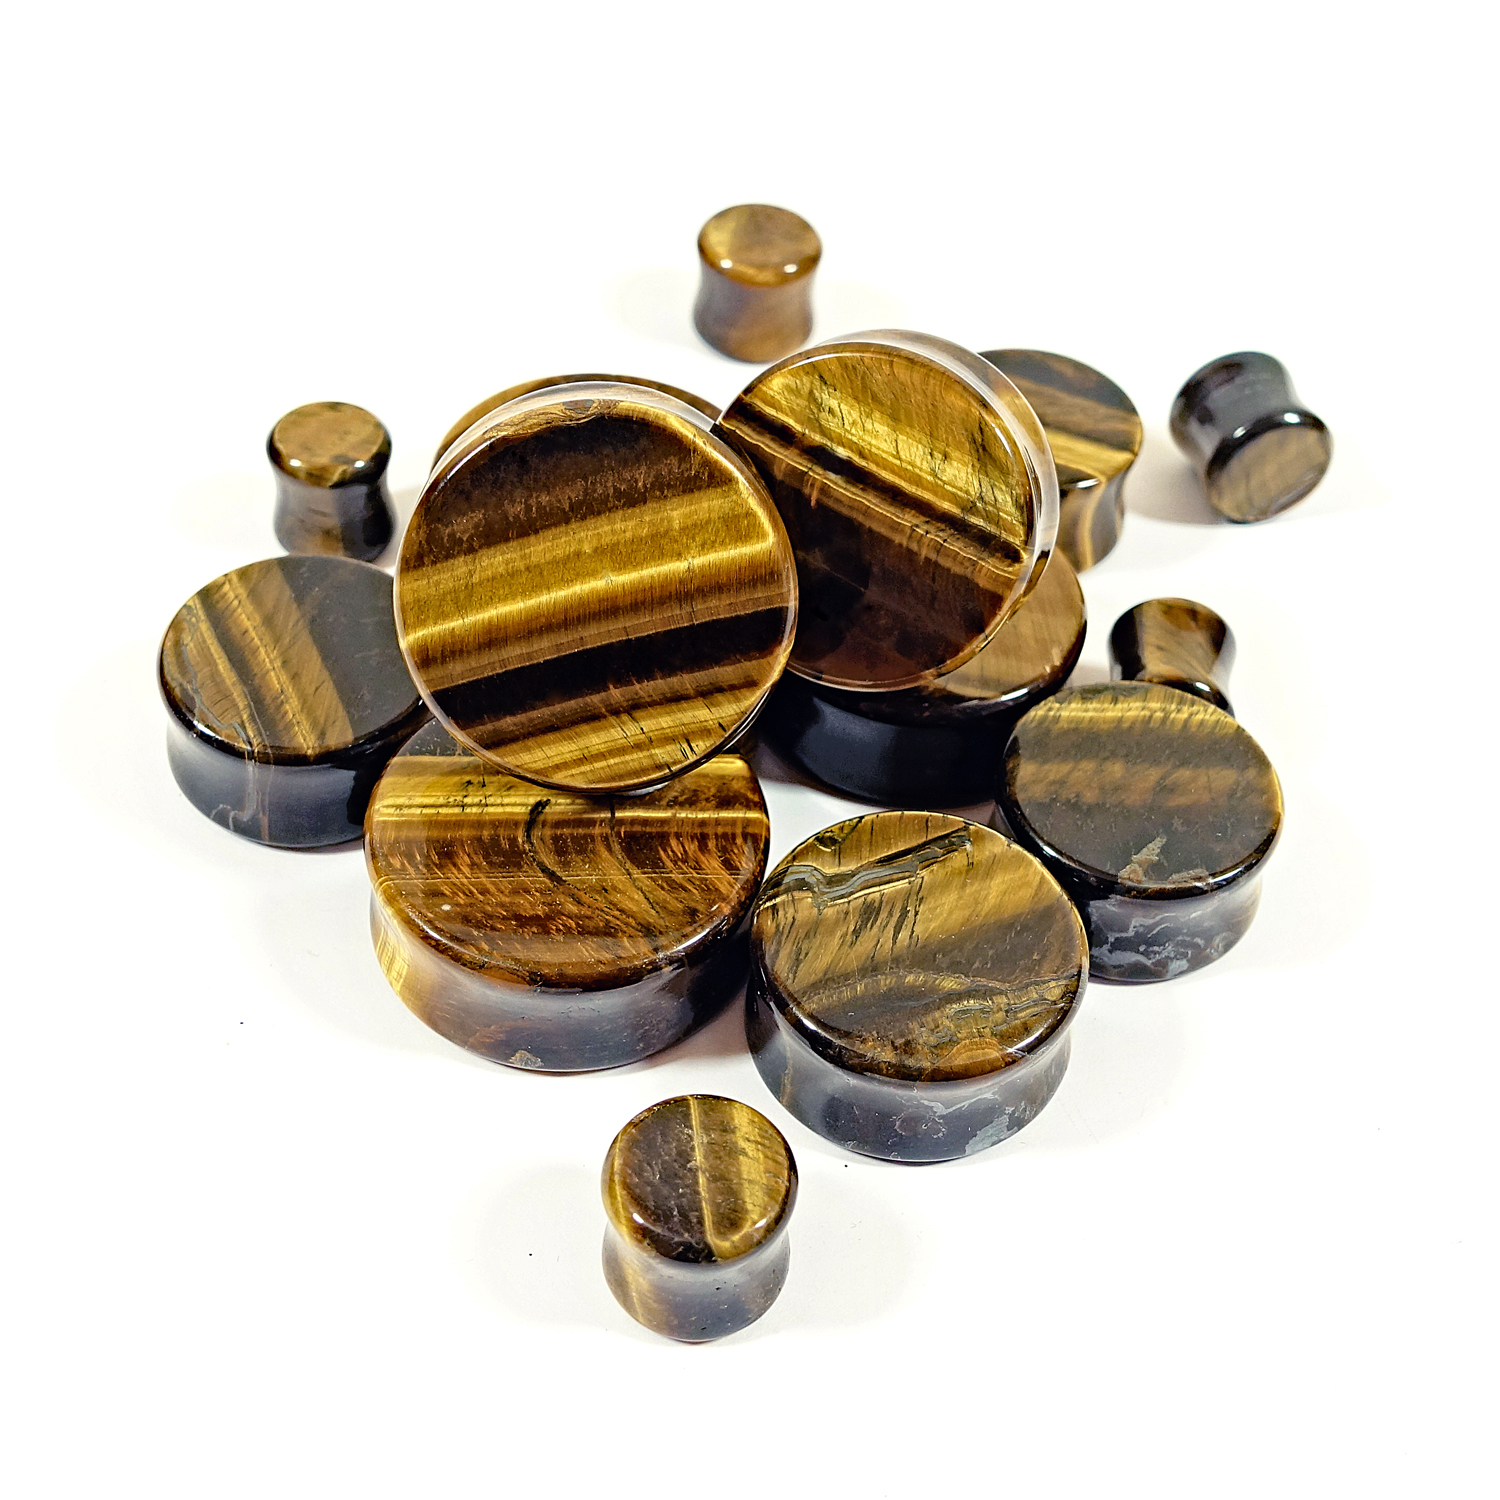 Lobal Domination Pair of Red Tiger Eye Organic Stone Plugs Gauges up to 25mm Available!